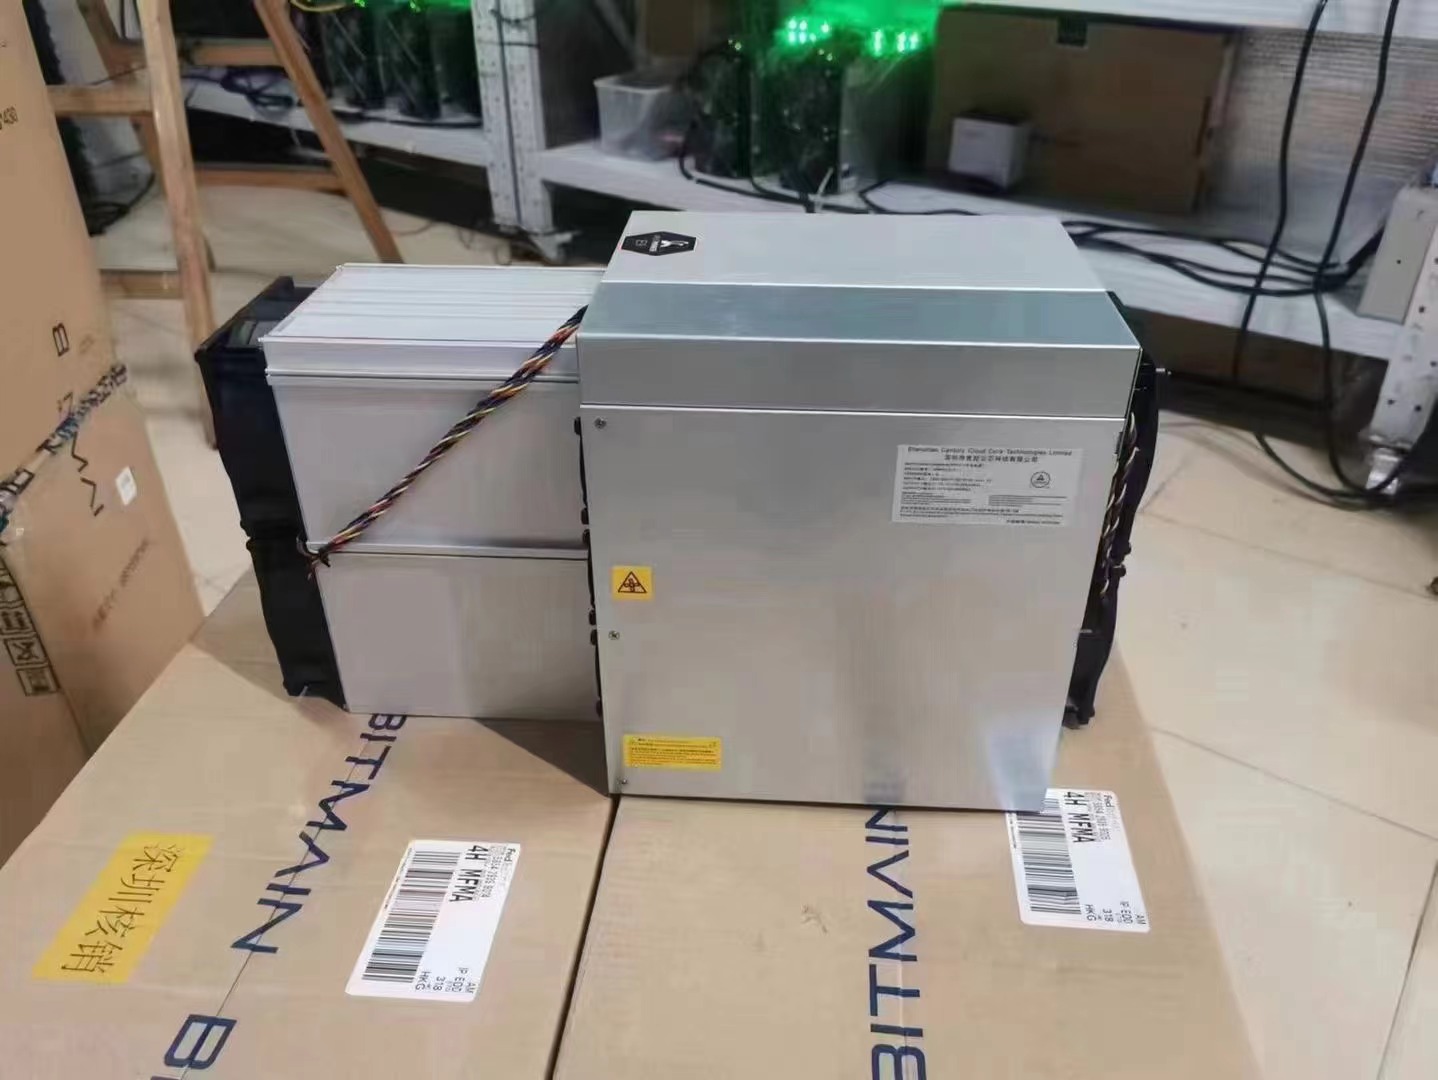 INSTOCK BRAND NEW Antminer E9 2400M/s 1920W Ethereum Miner Machine Power Efficiency of 0.8J/M hashrate of 2.4Gh/s 